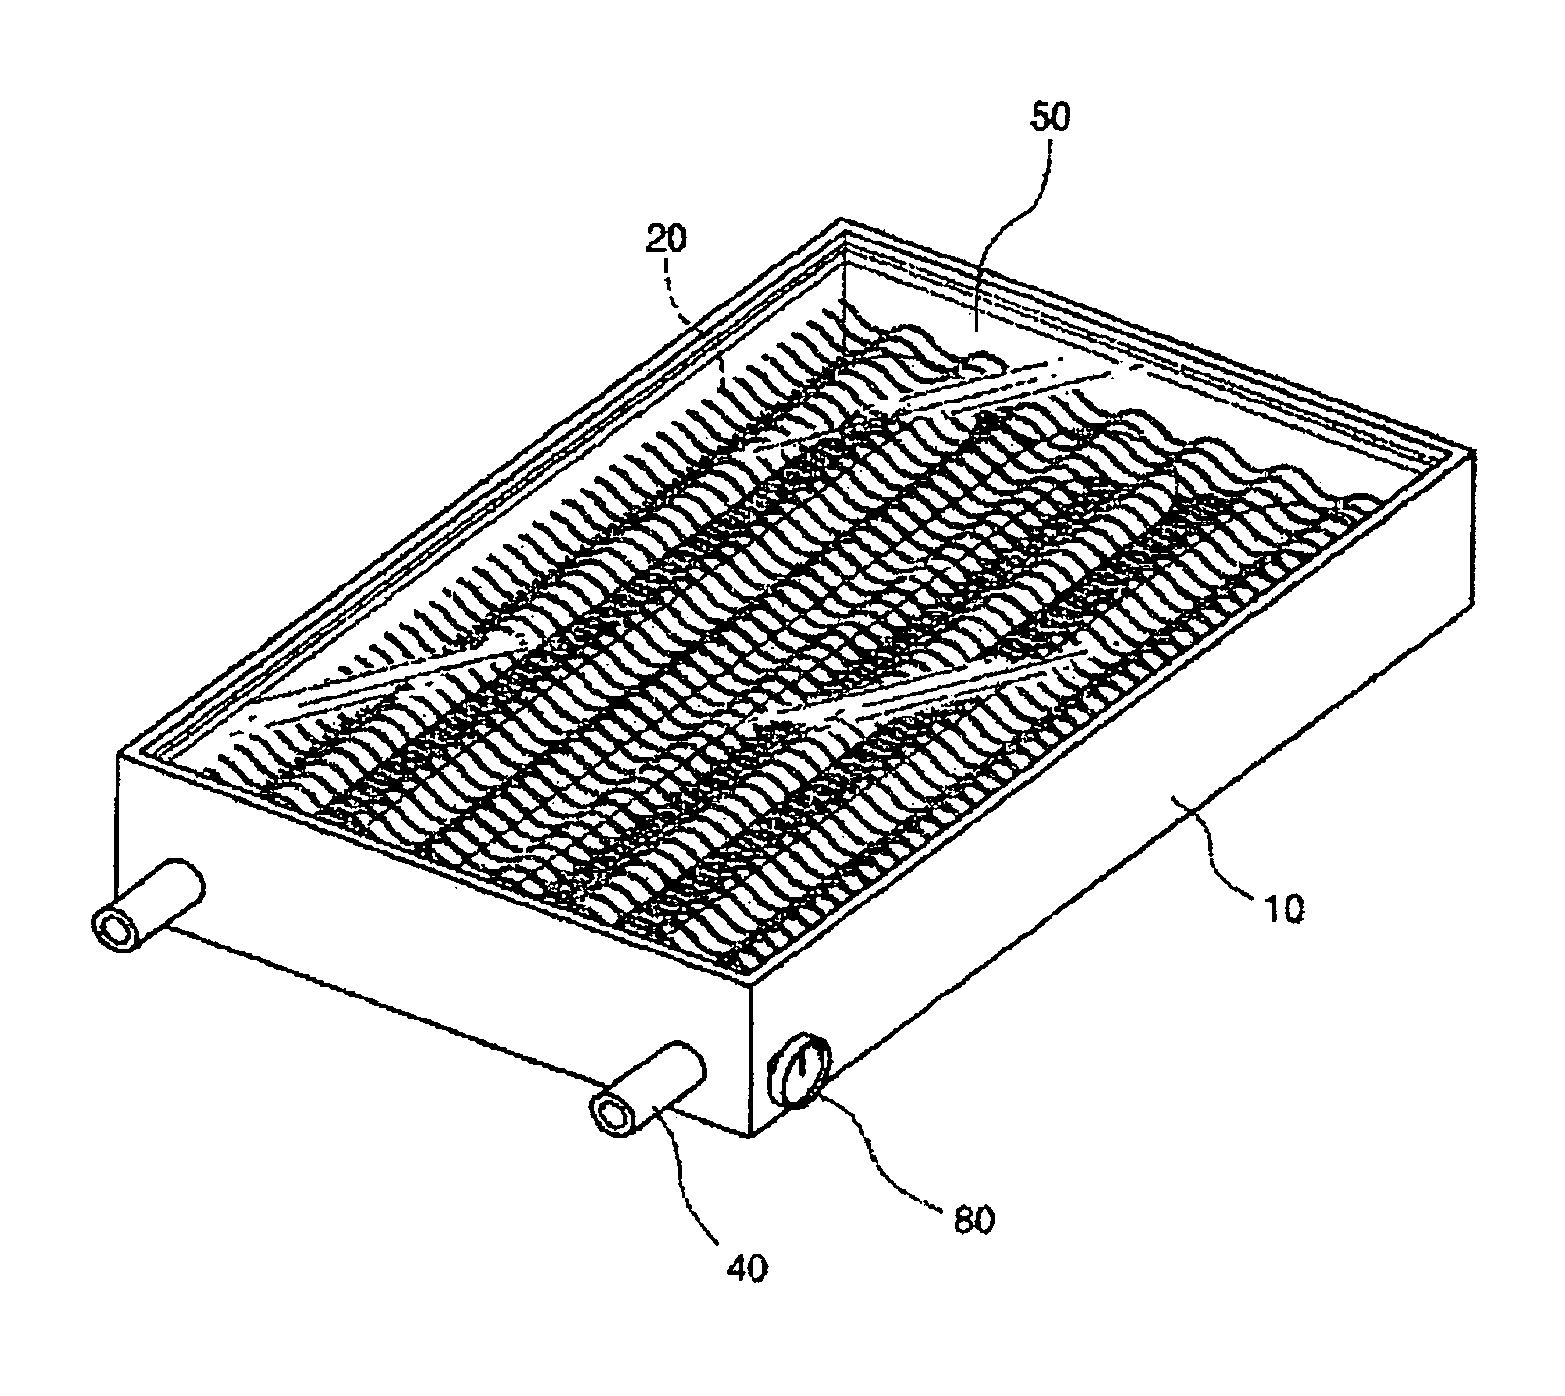 Apparatus for amplifying solar energy by recycling greenhouse gas